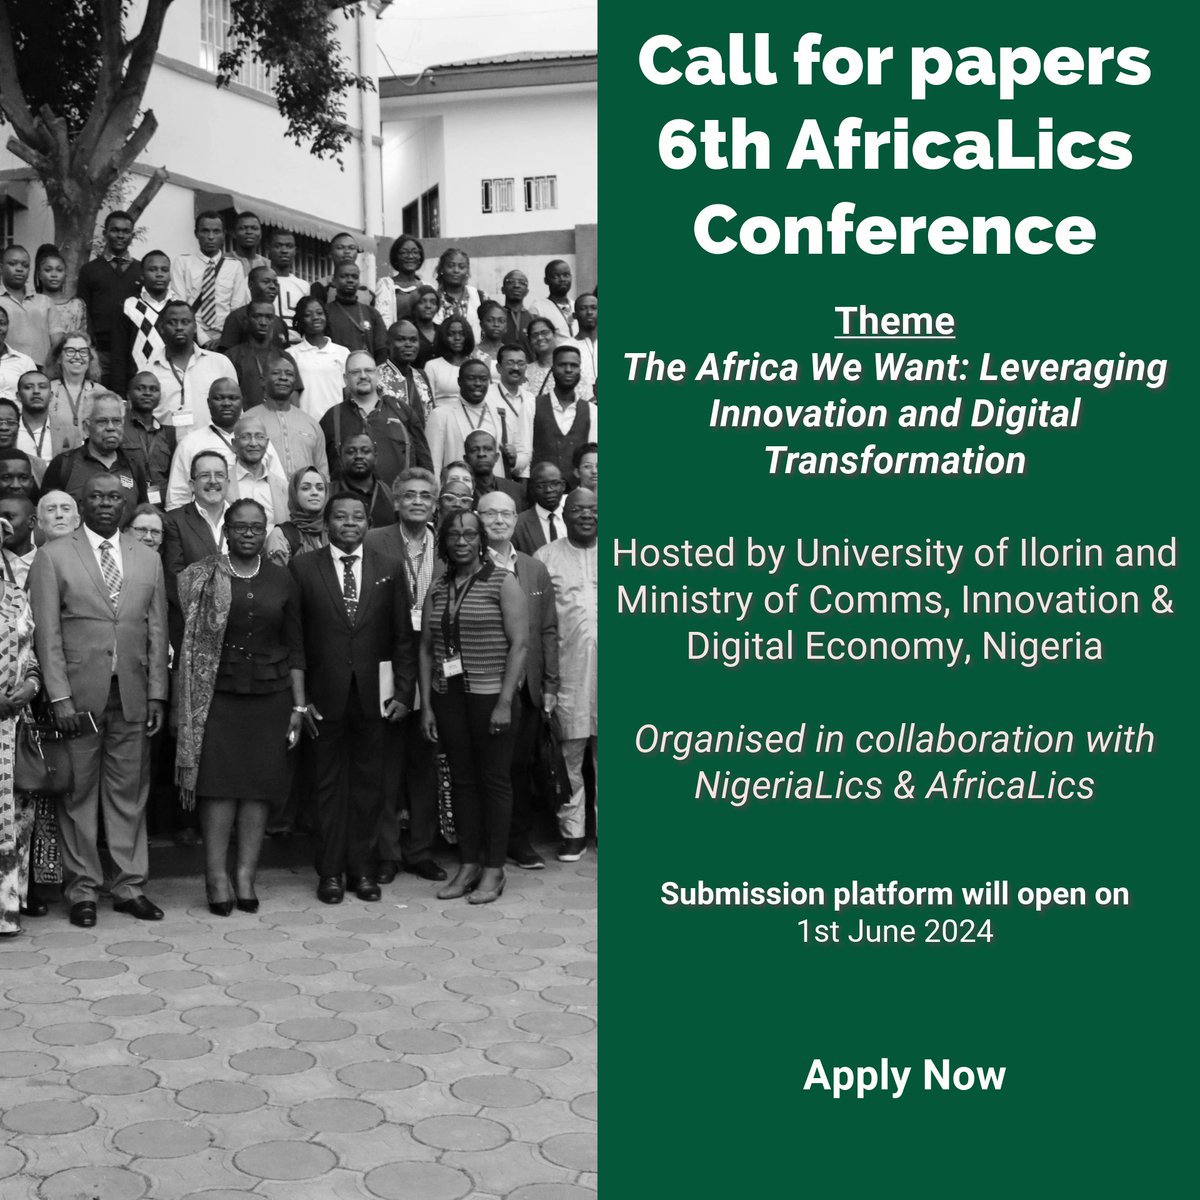 Exciting News! Call for the 6th AfricaLics Conference is now open! Theme: The Africa We Want: Leveraging Innovation and Digital Transformation. Submission platform opens June 1st, 2024 Mark your calendars! Learn More: africalics.org/event/6th-rese… #Innovation #DigitalTransformation